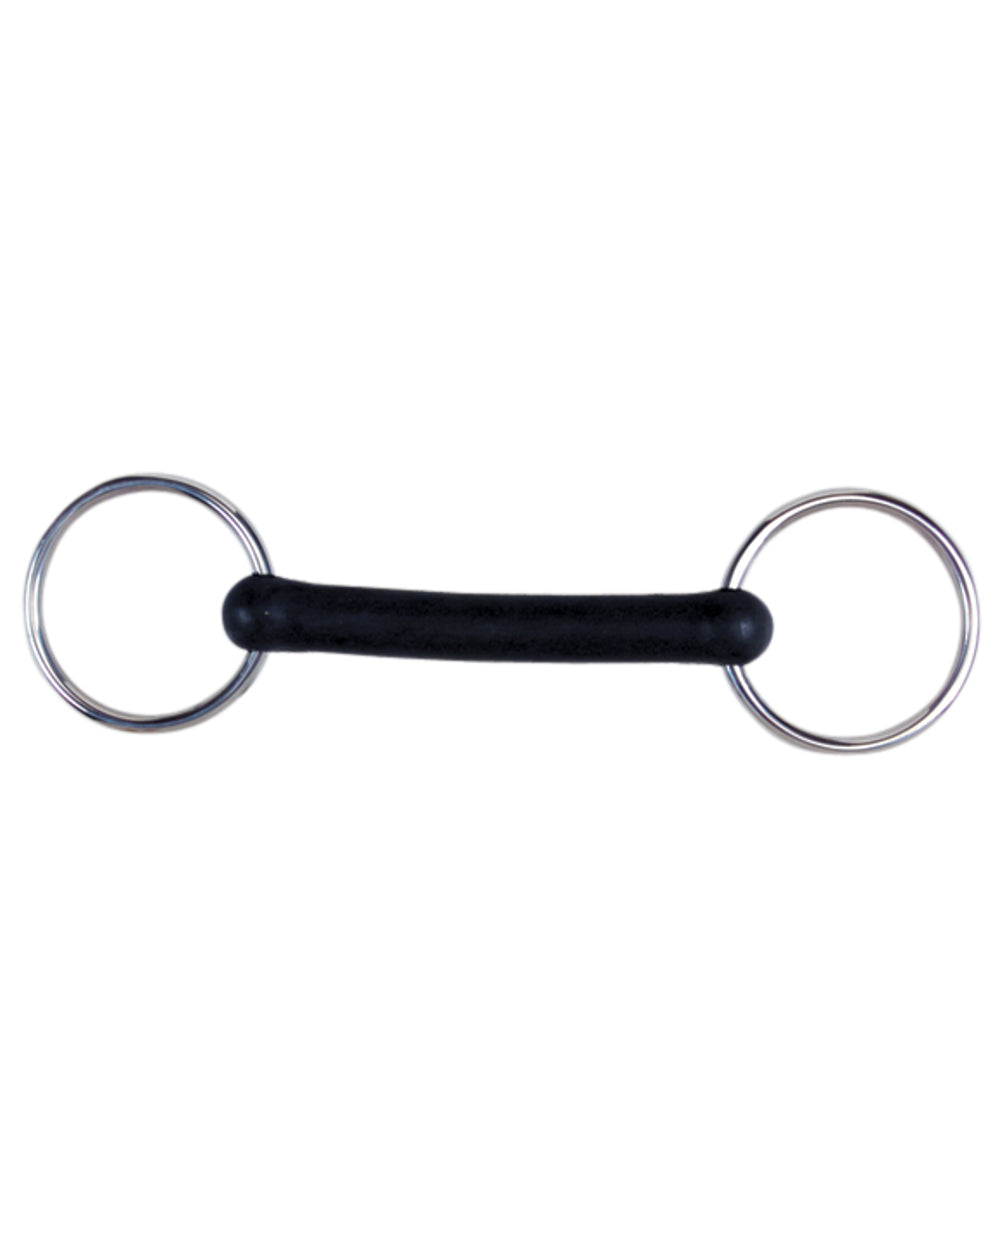 Korsteel Flexi Rubber Mullen Mouth Loose Ring Snaffle Bit on white background